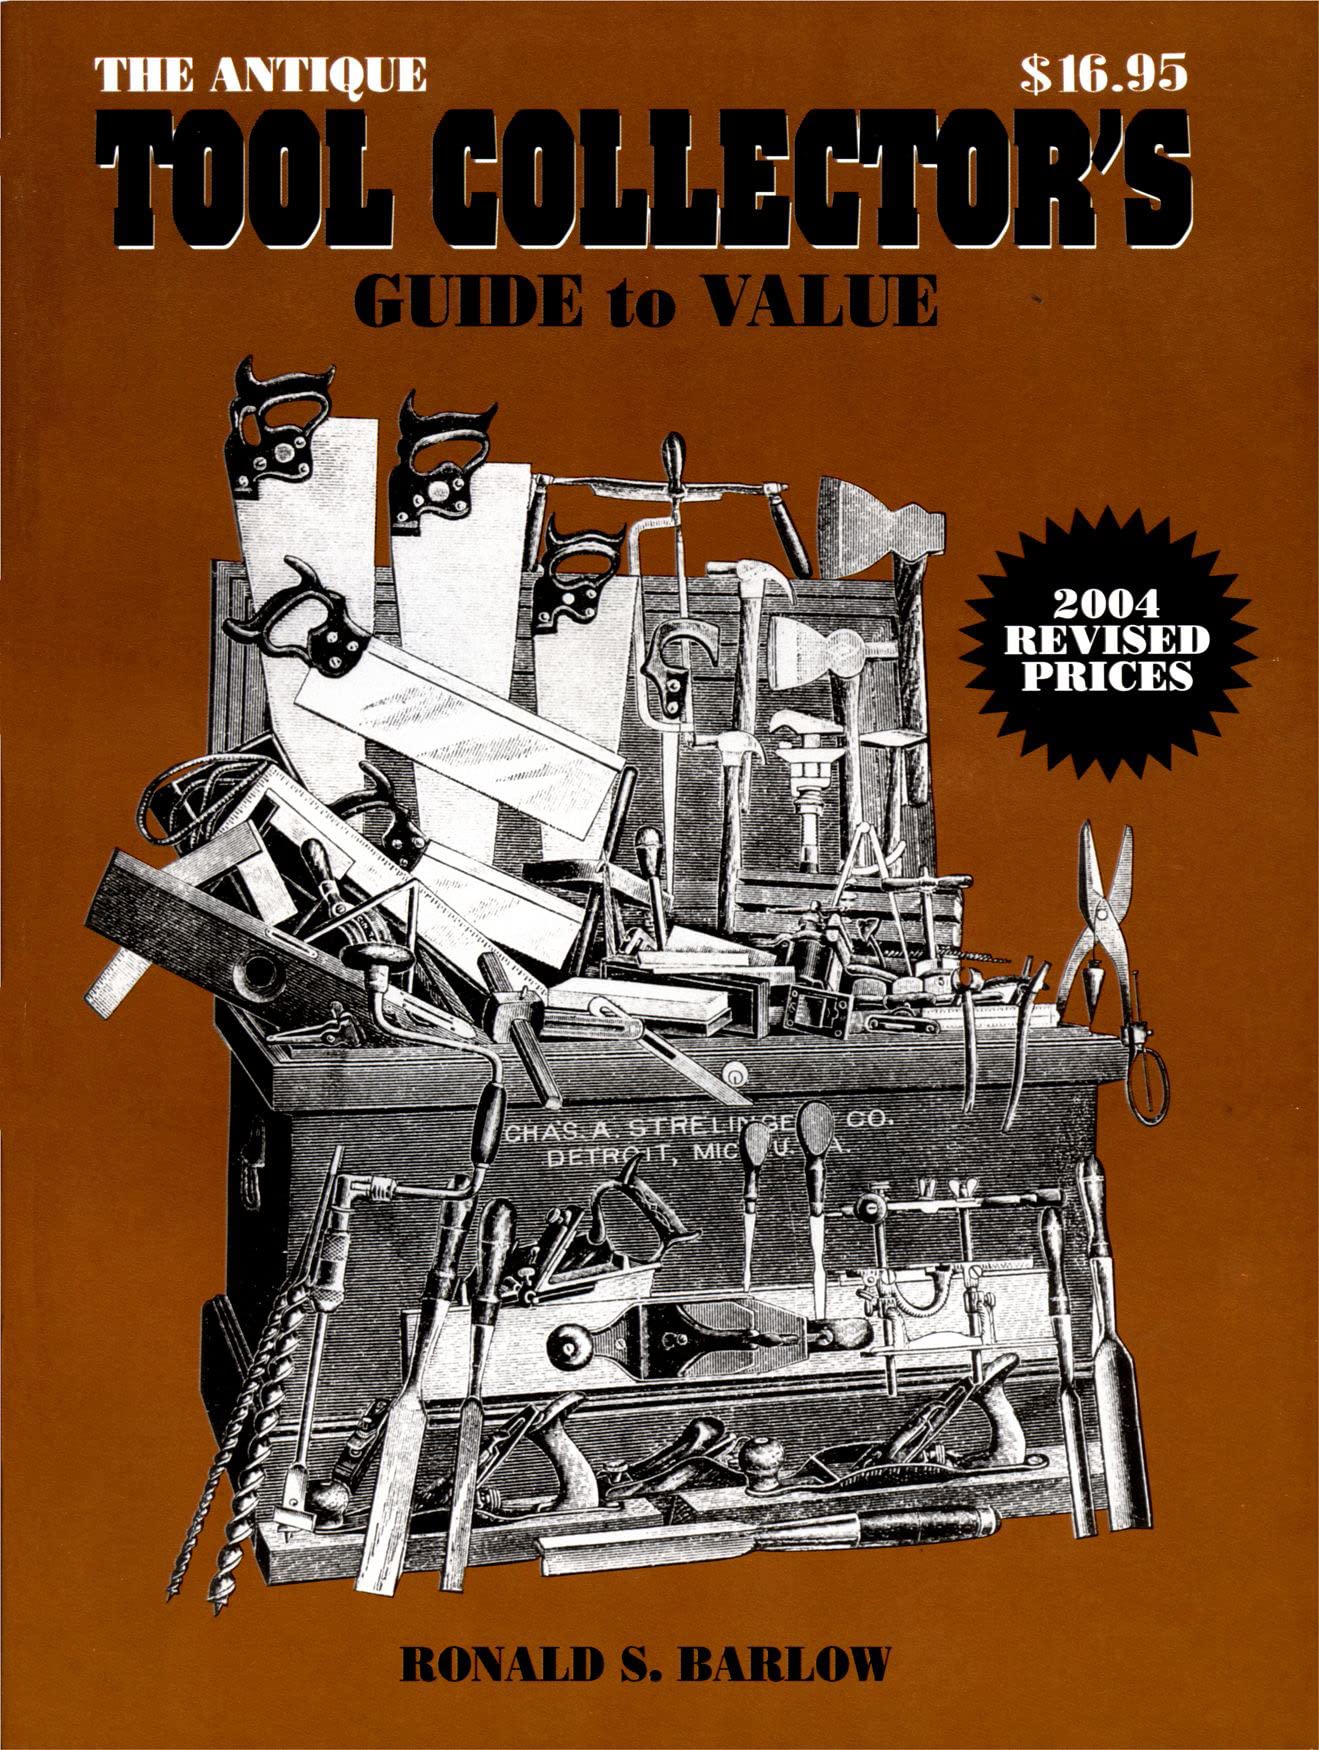 The Antique Tool Collectors Guide to Value